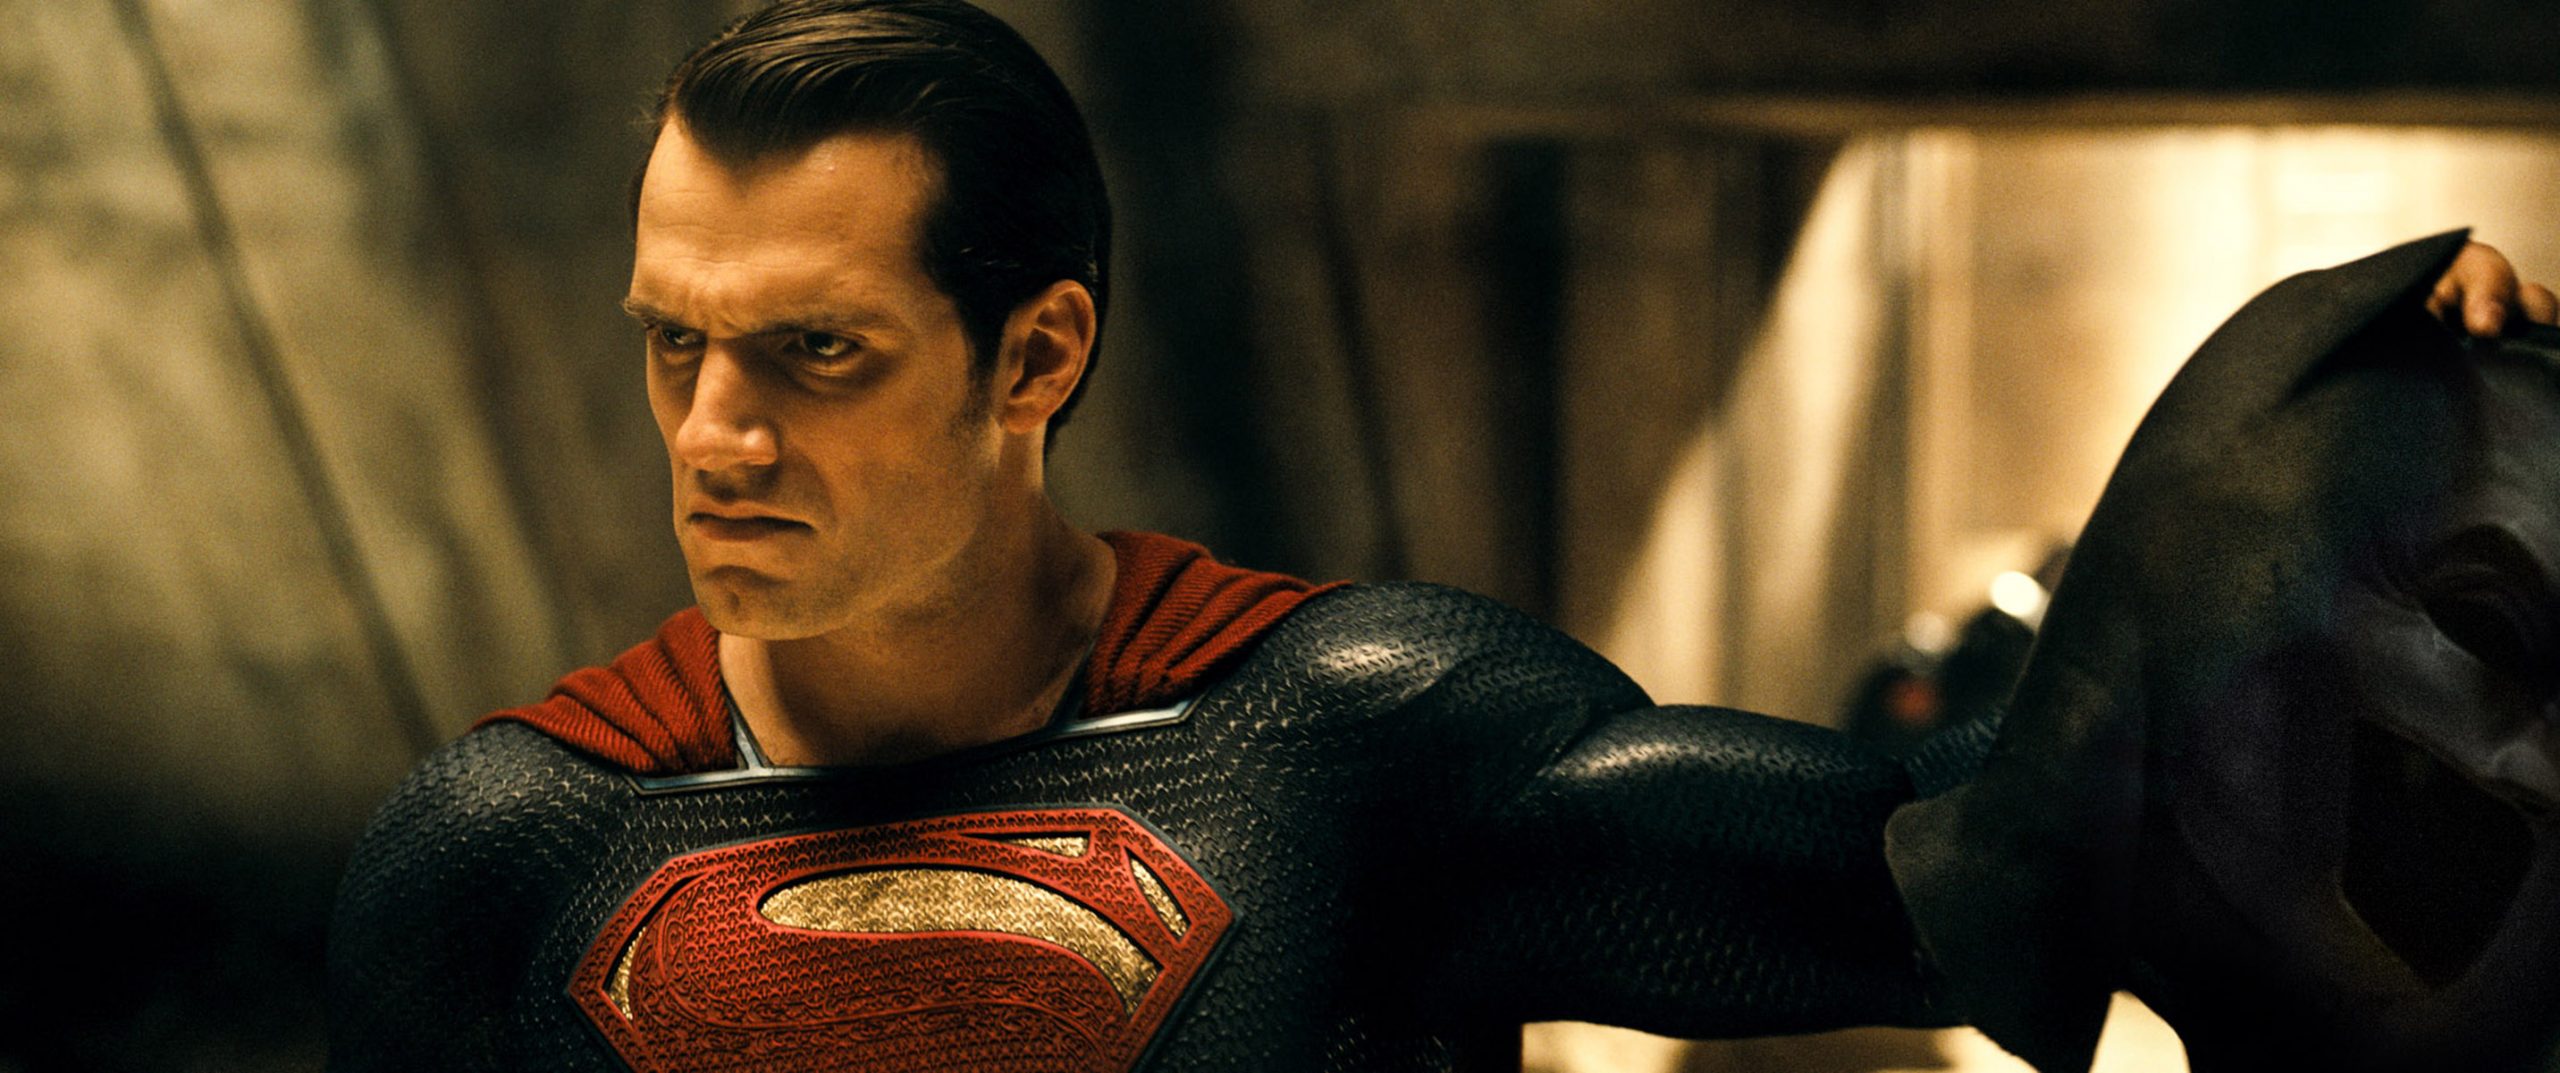 James Gunn HAS Discussed A DCU Role For Henry Cavill But Not The One Rumored